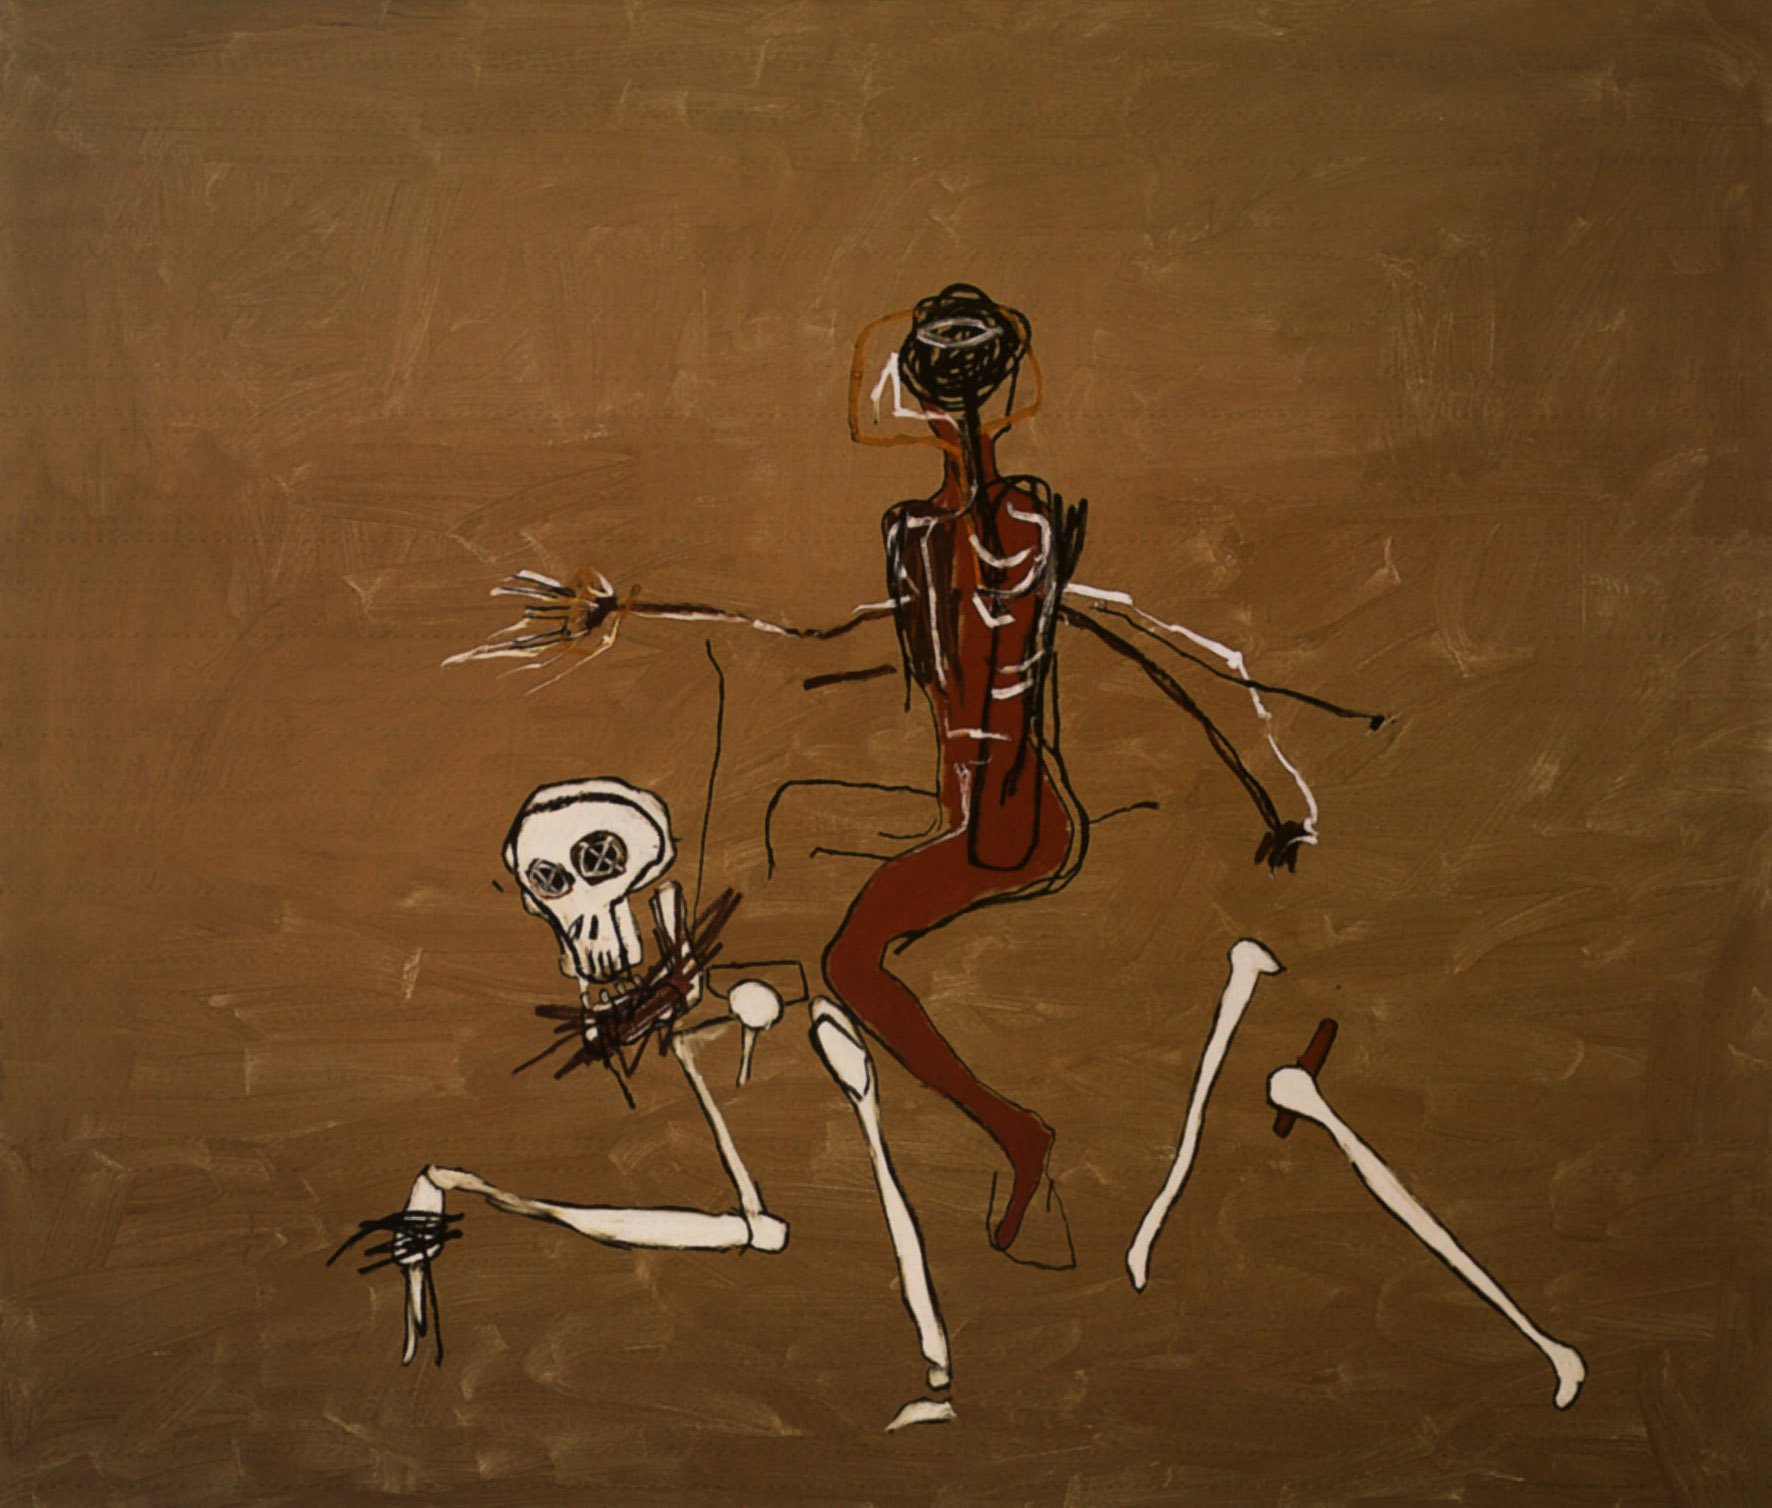 Basquiat, Riding with death, 1988